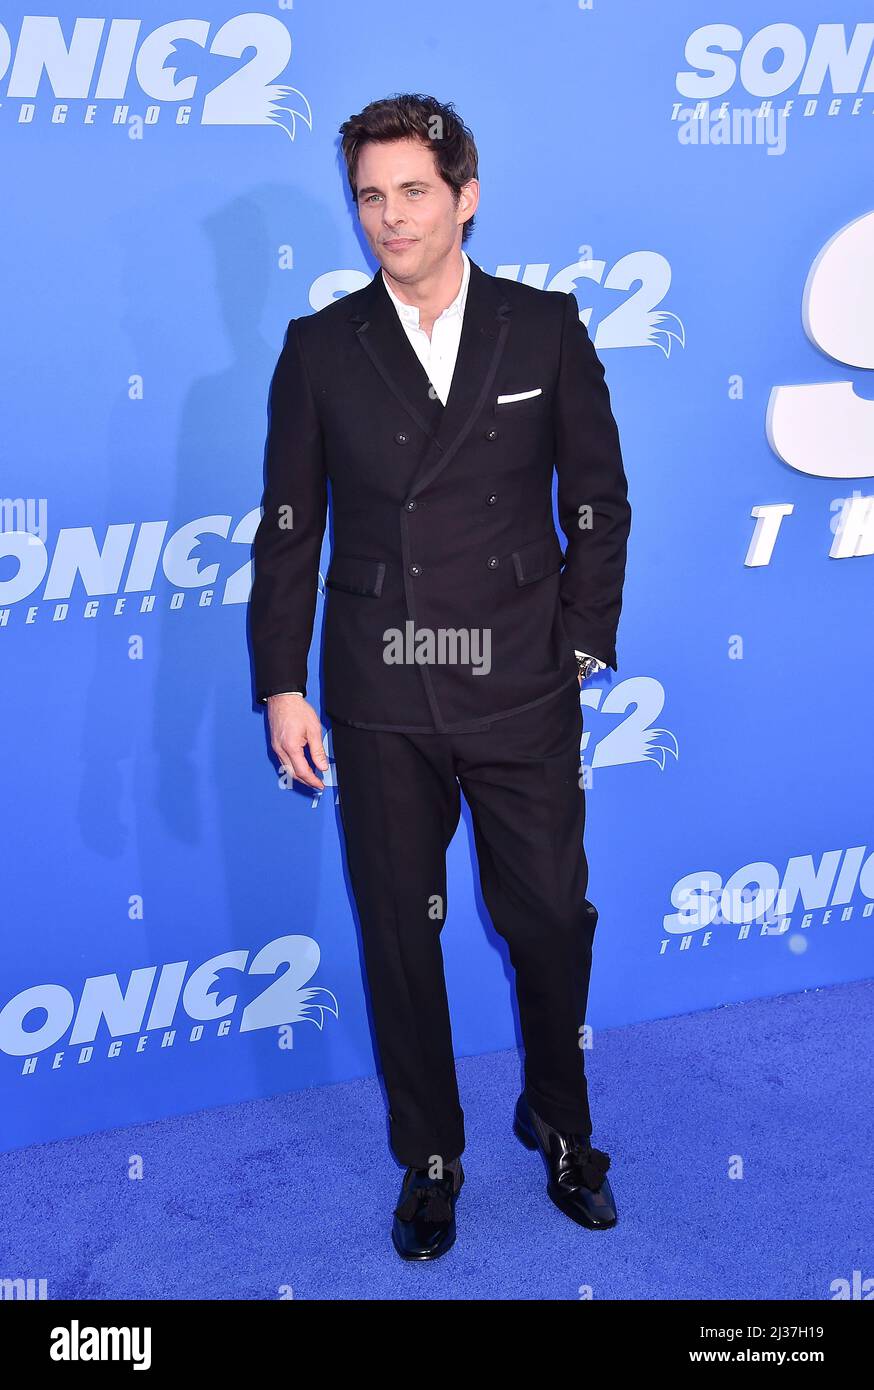 The Cast of Sonic the Hedgehog 2 Attend World Premiere in LA